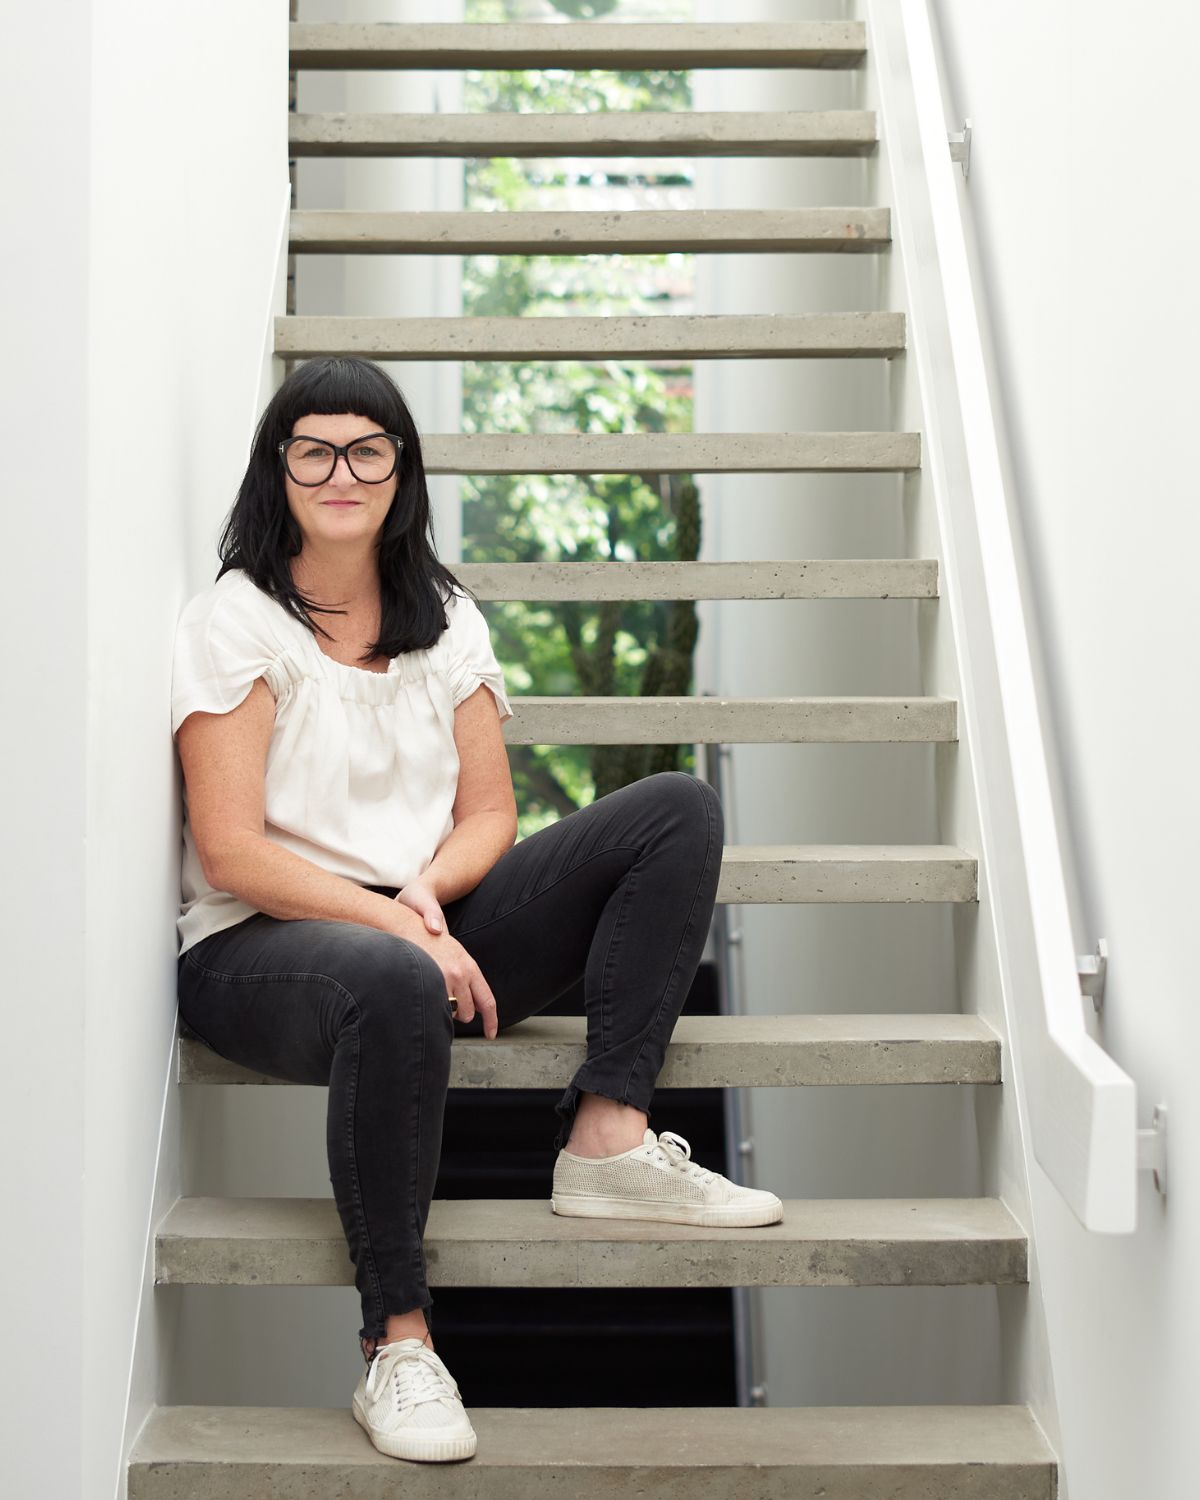 Artist Tara Donovan sporting black hair, big glasses, black pants, and a white shirt. She is seated on a flight of stairs.